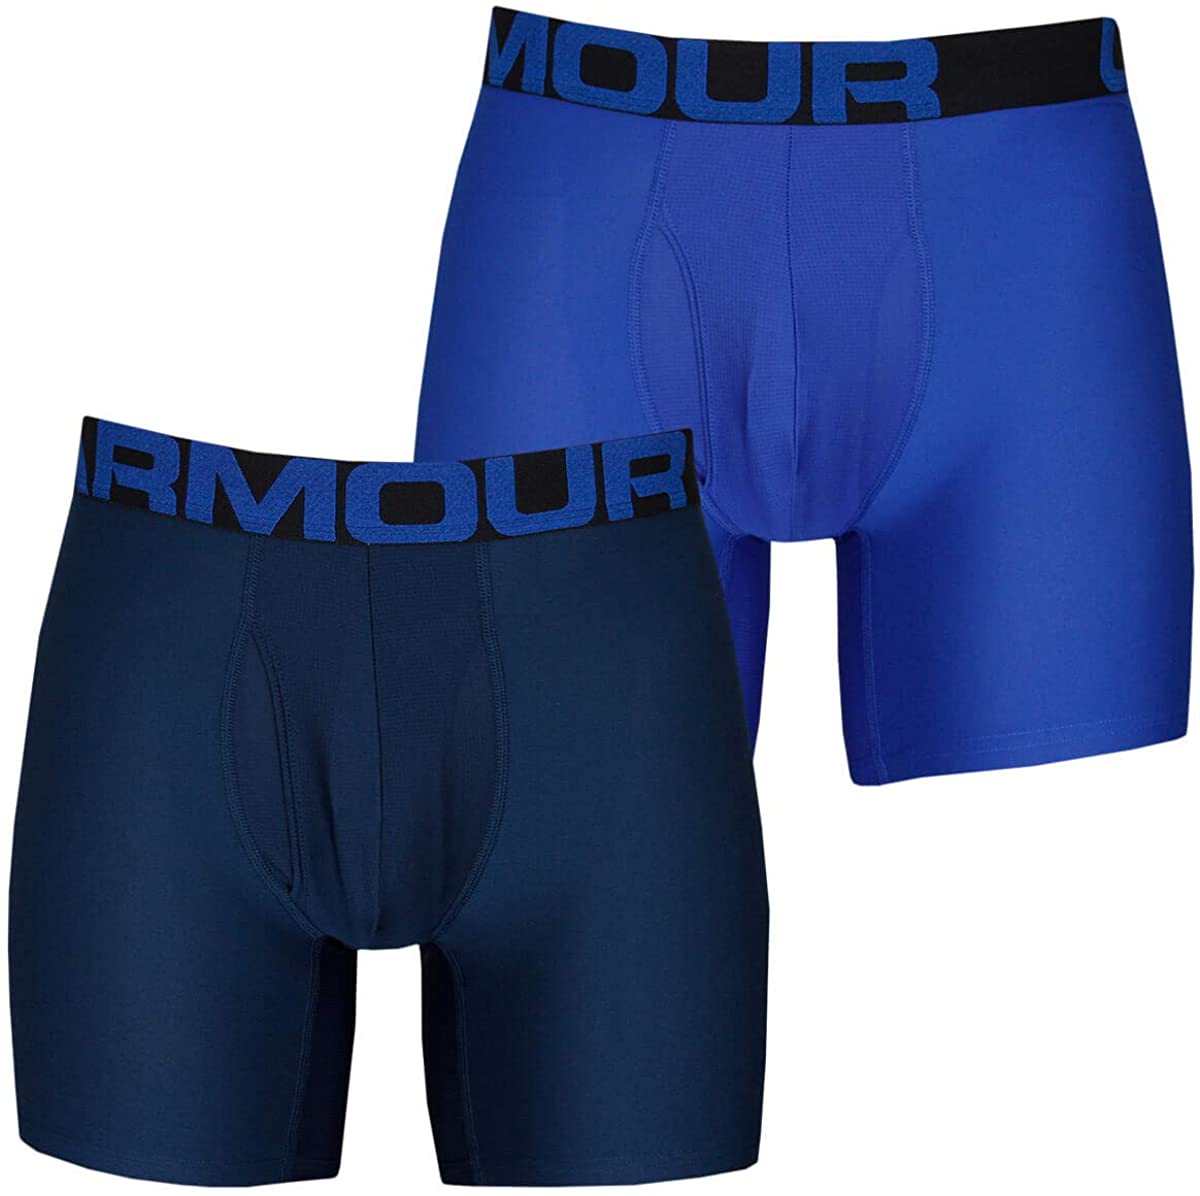 Inner Armour Under Armour 1363619400SM 6 in. Tech Boxerjock, Royal - Small  - Pack of 2